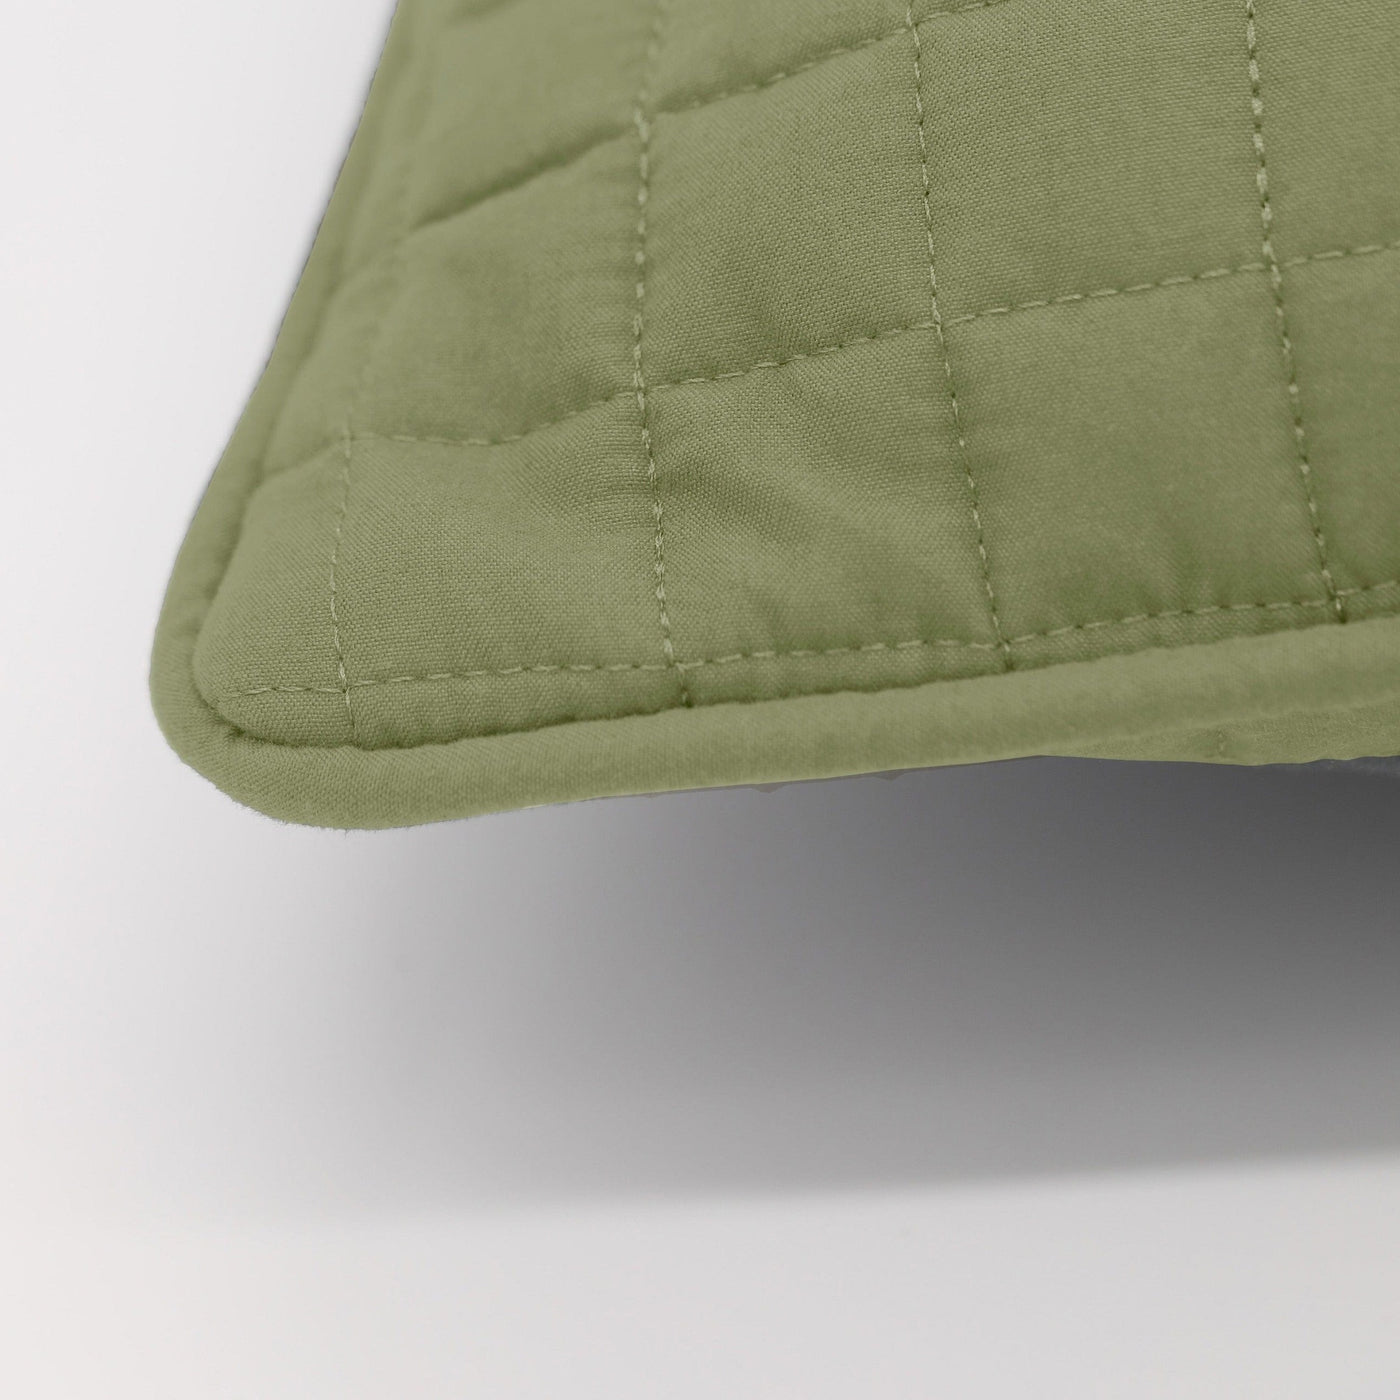 Details and Texture of Vilano Quilted Sham and Pillow Covers in Sage Green#color_vilano-sage-green